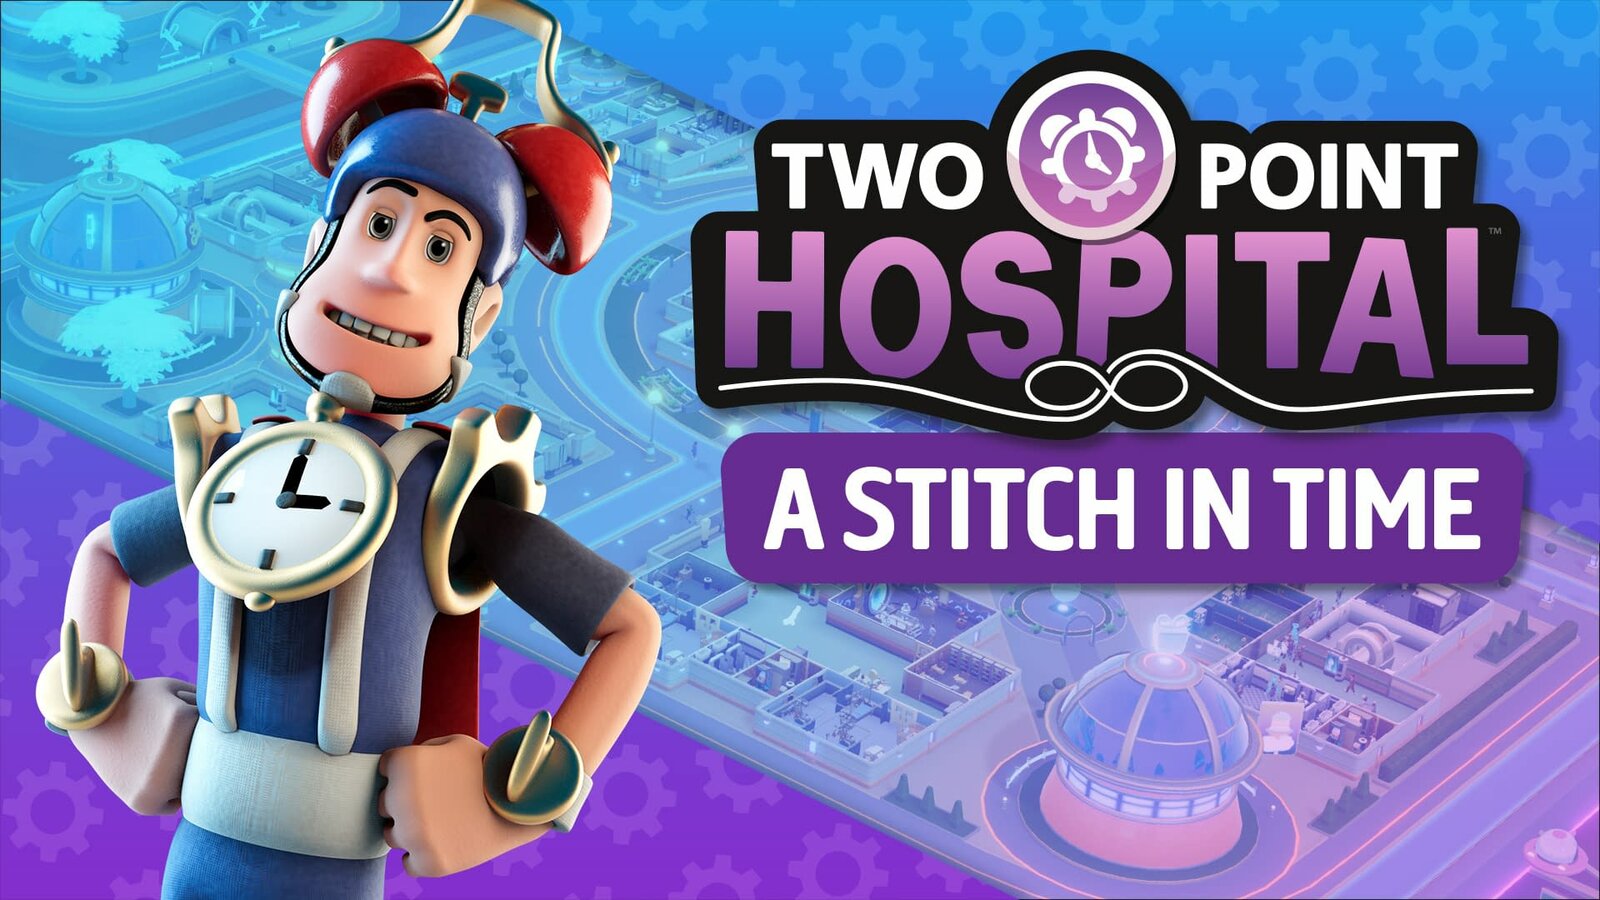 Two Point Hospital - A Stitch in Time